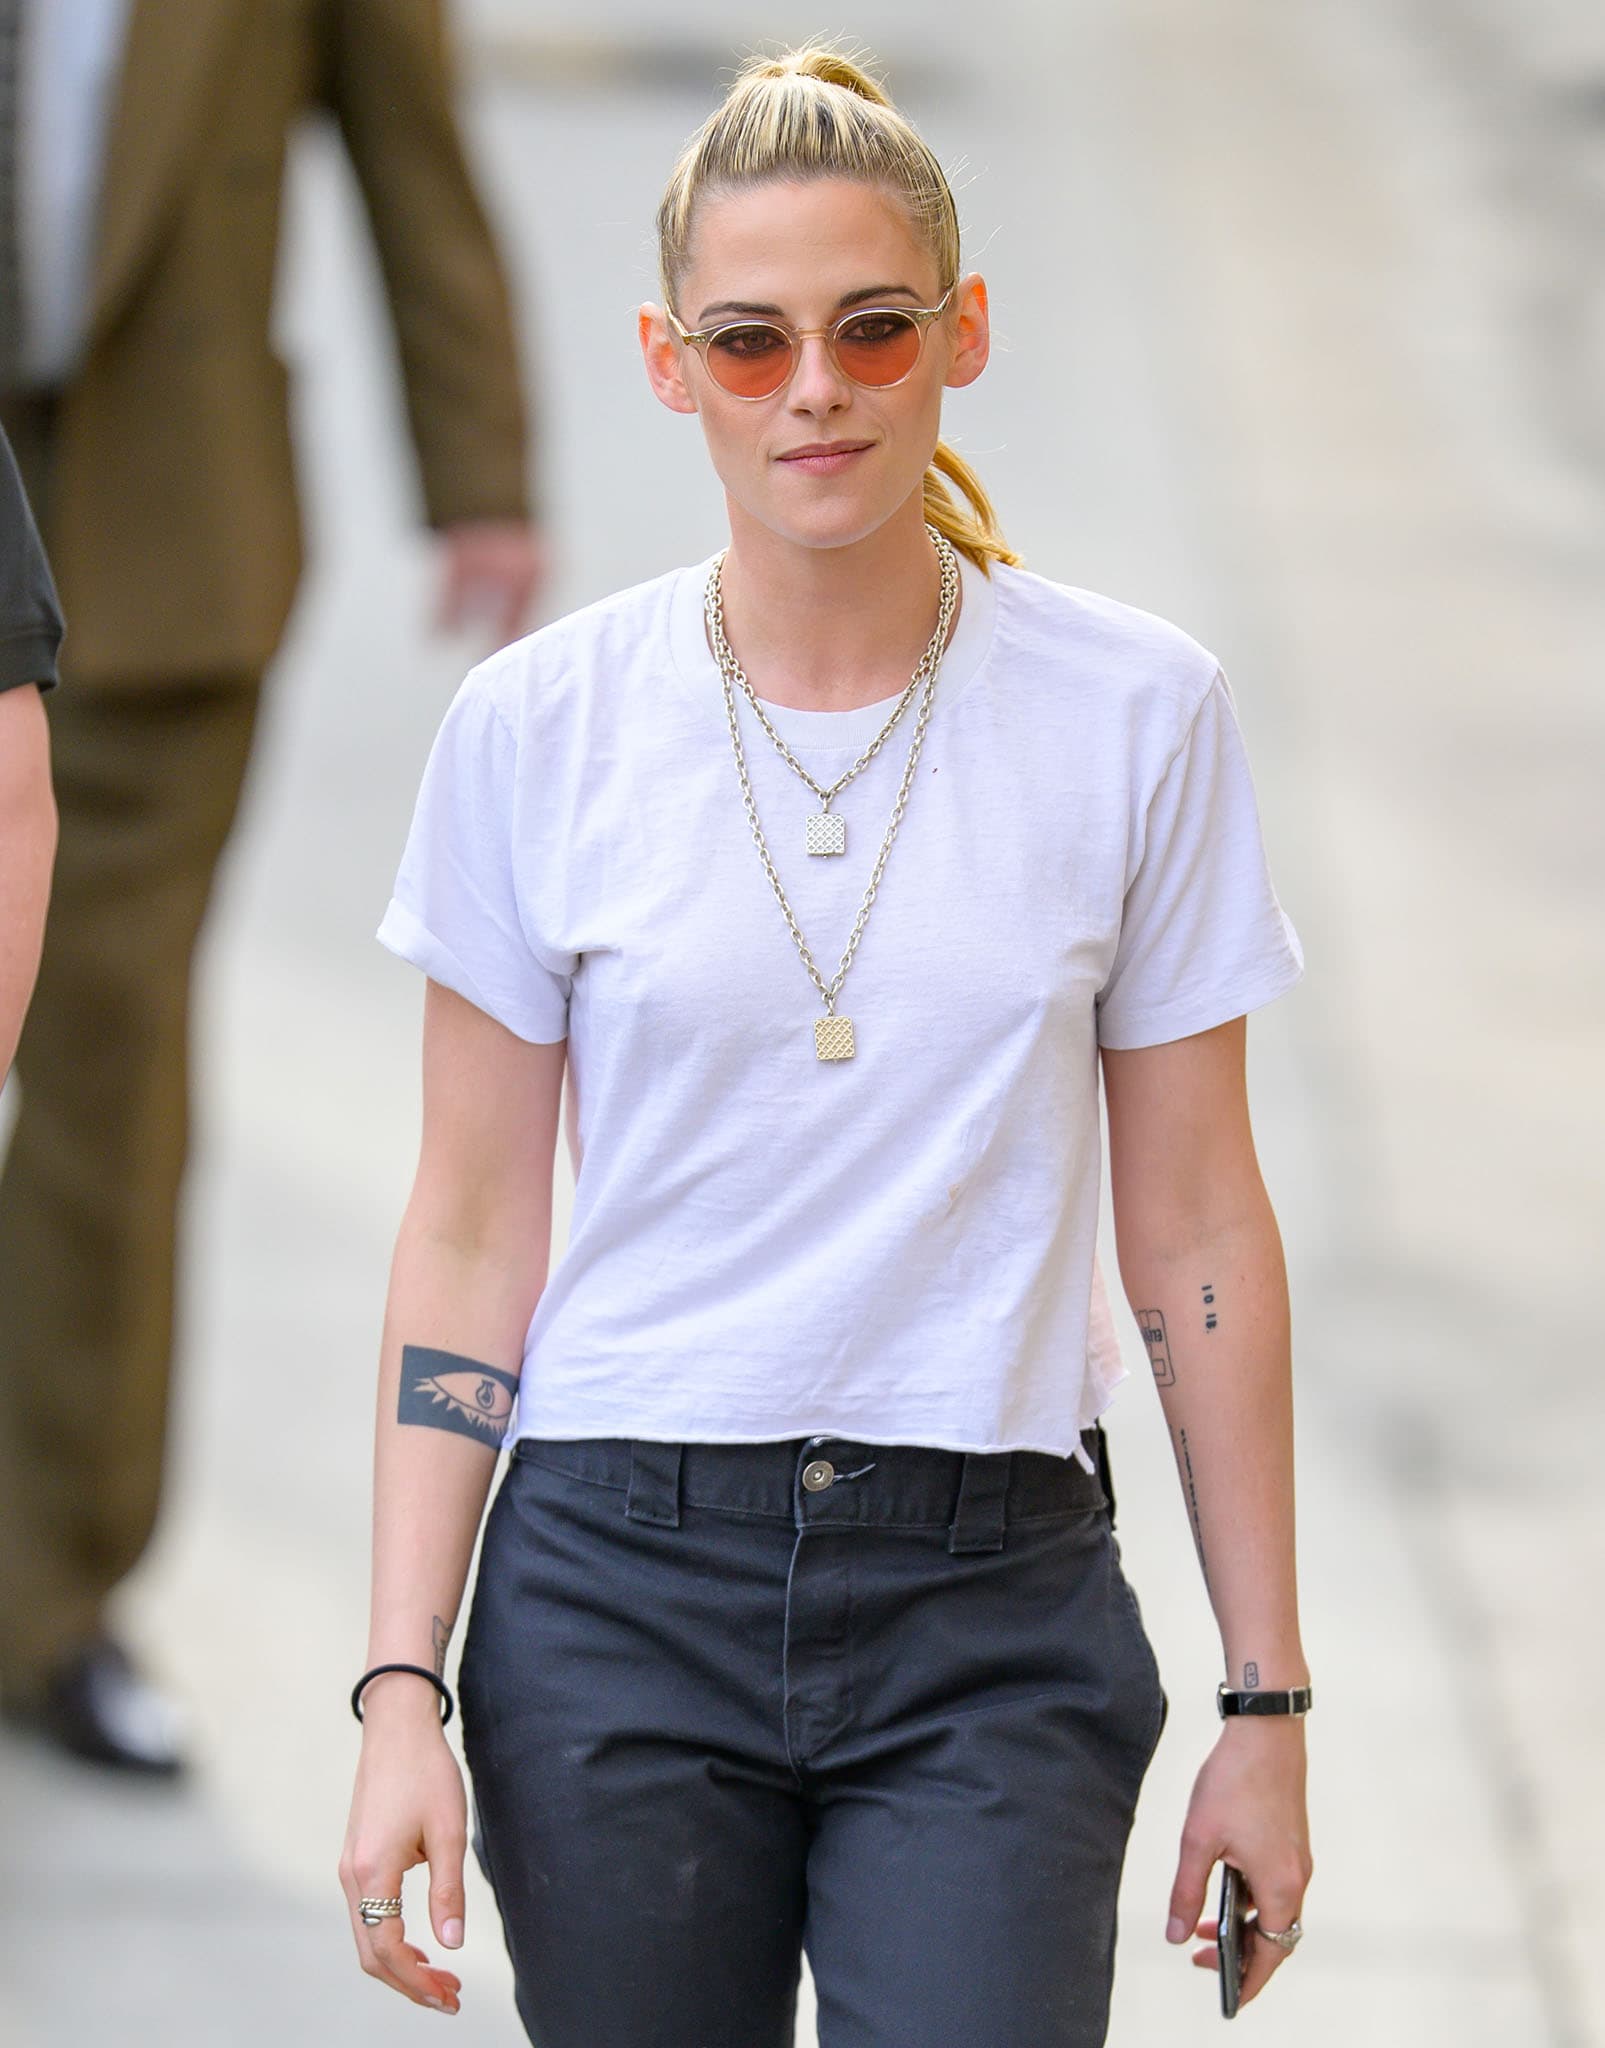 Kristen Stewart ties her hair back and styles her casual outfit with chain necklaces and tinted sunglasses